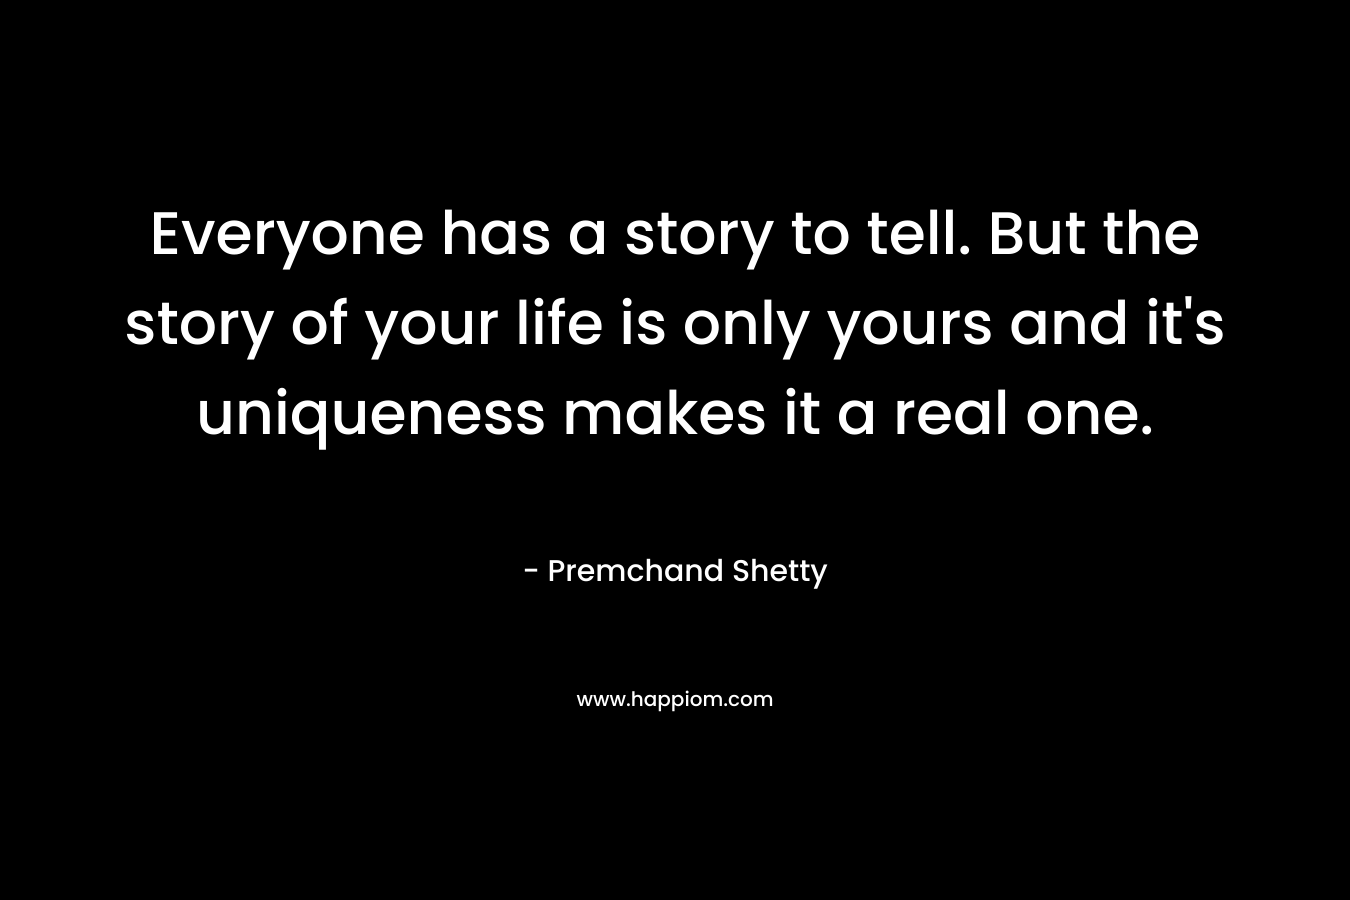 Everyone has a story to tell. But the story of your life is only yours and it's uniqueness makes it a real one.